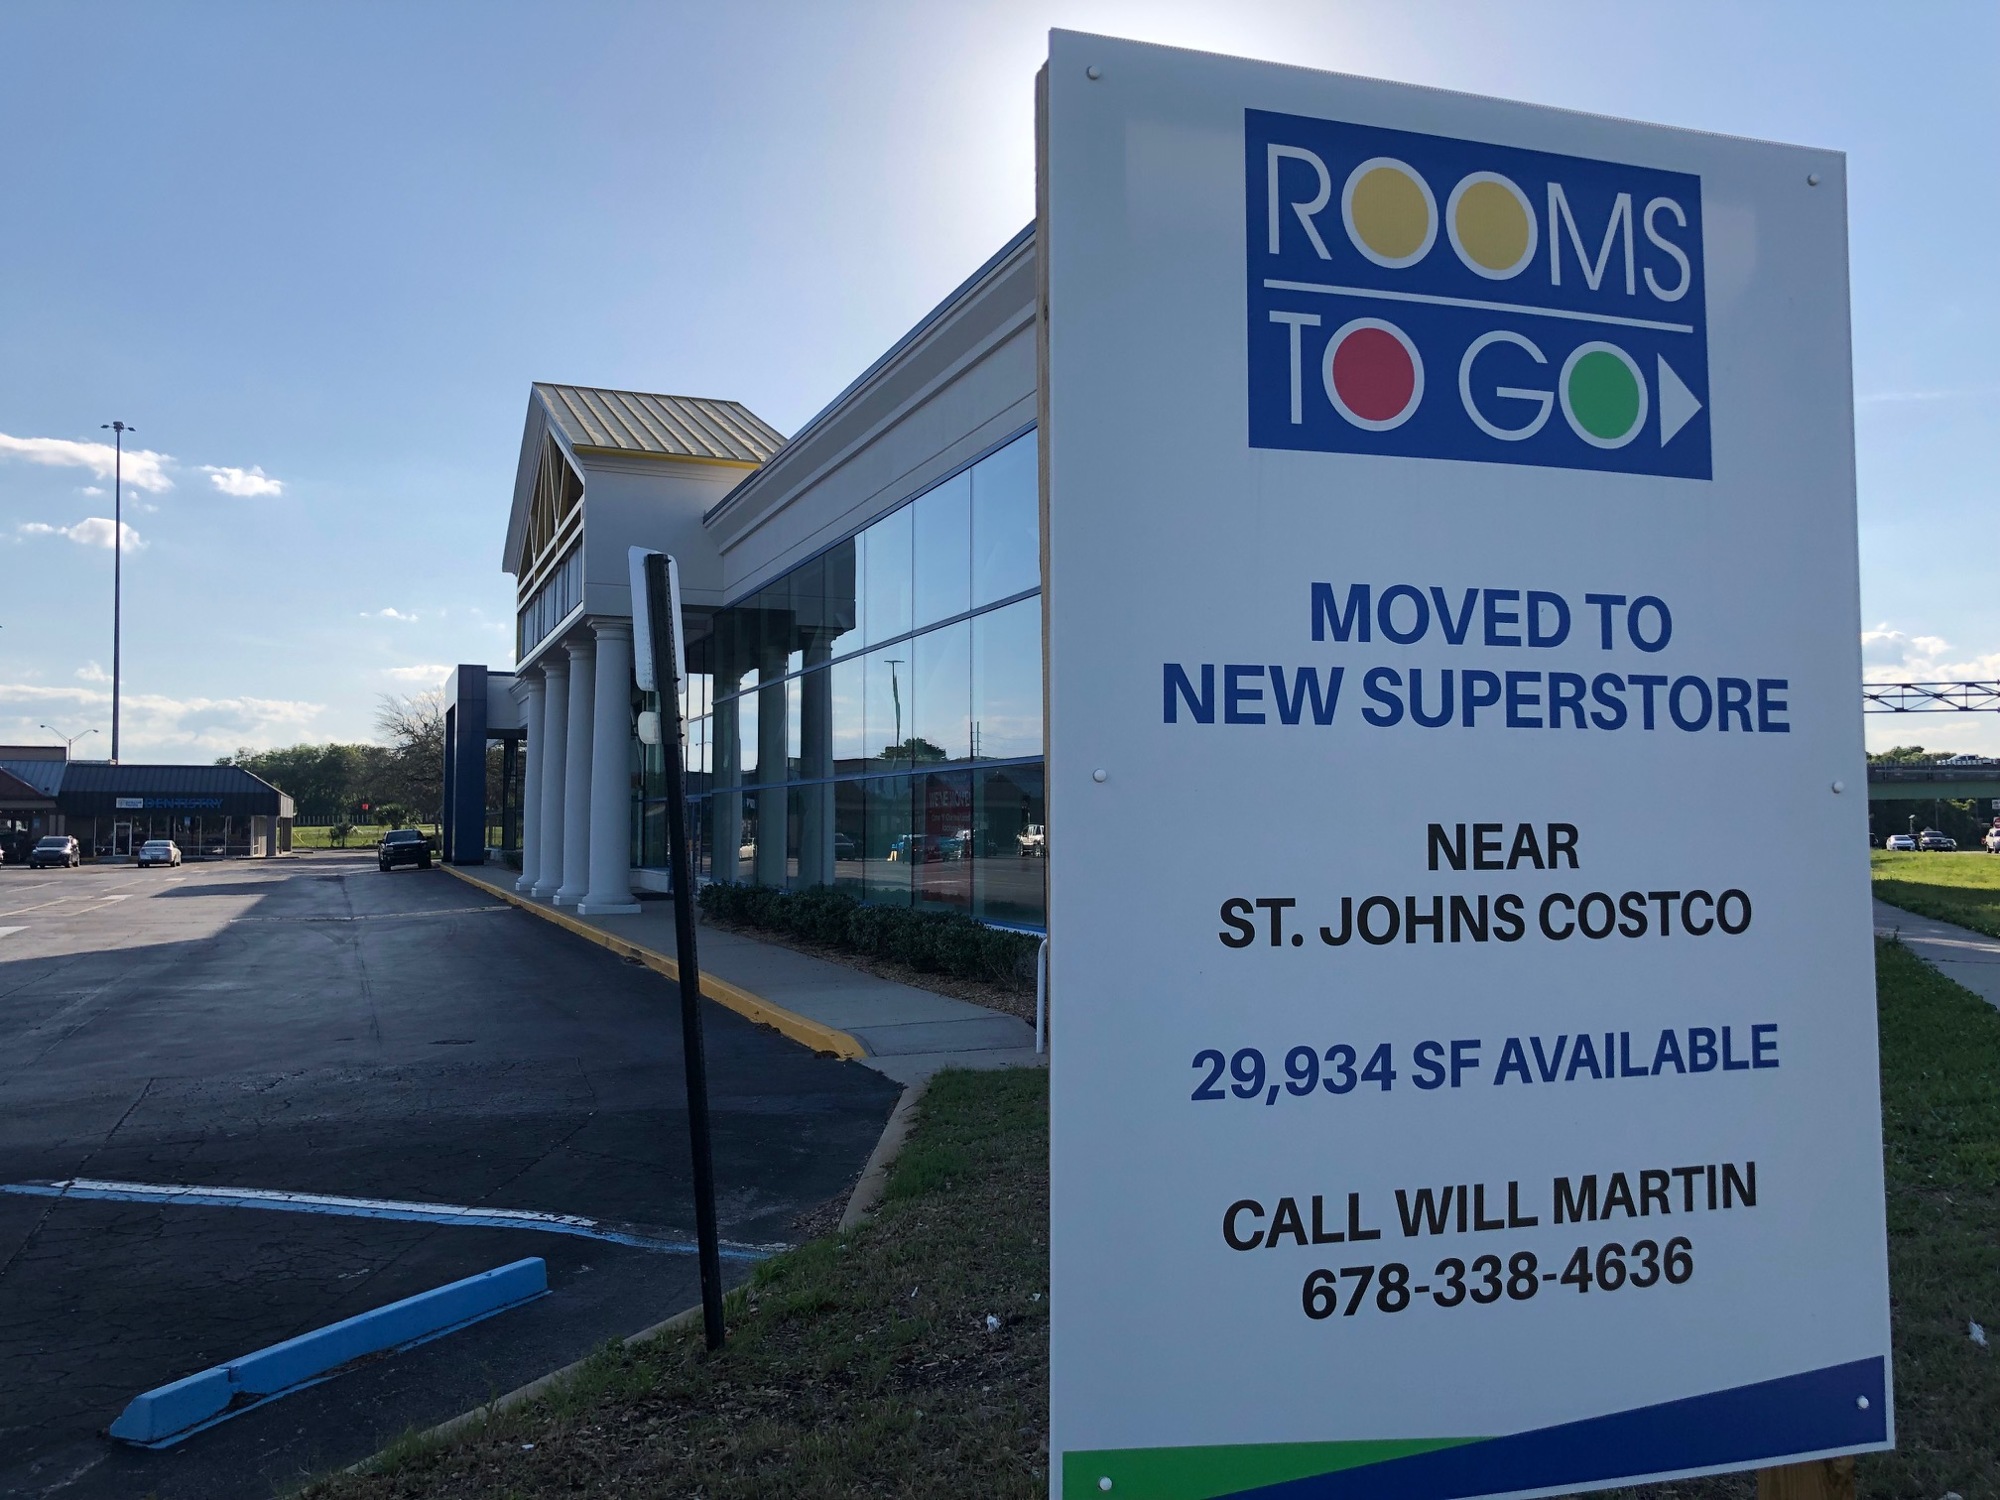 Rooms To Go  moved to its new superstore at The Markets at Town Center “near St. Johns Costco.”